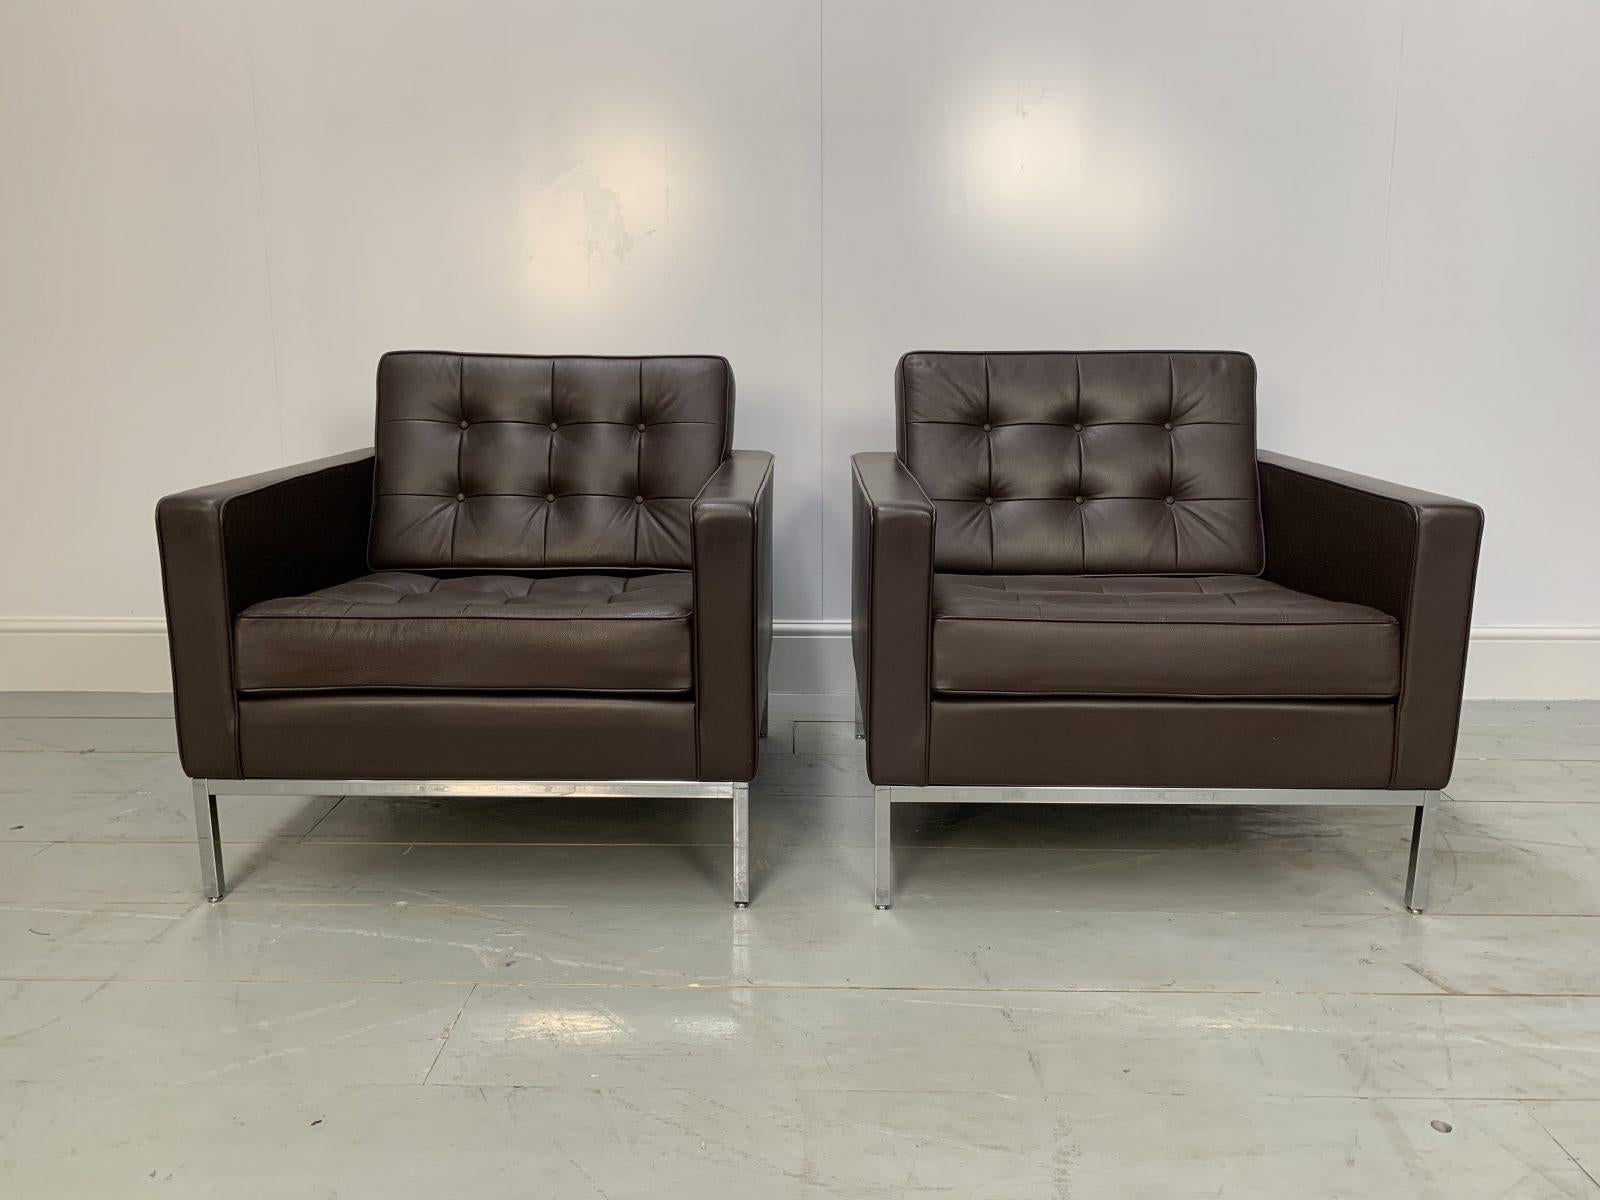 On offer on this occasion is a rare, original identical pair of “Florence Knoll” lounge chairs (remarkably, two of four identical pieces available at present) from the world renown furniture house of Knoll Studio, dressed in their sublime Knoll